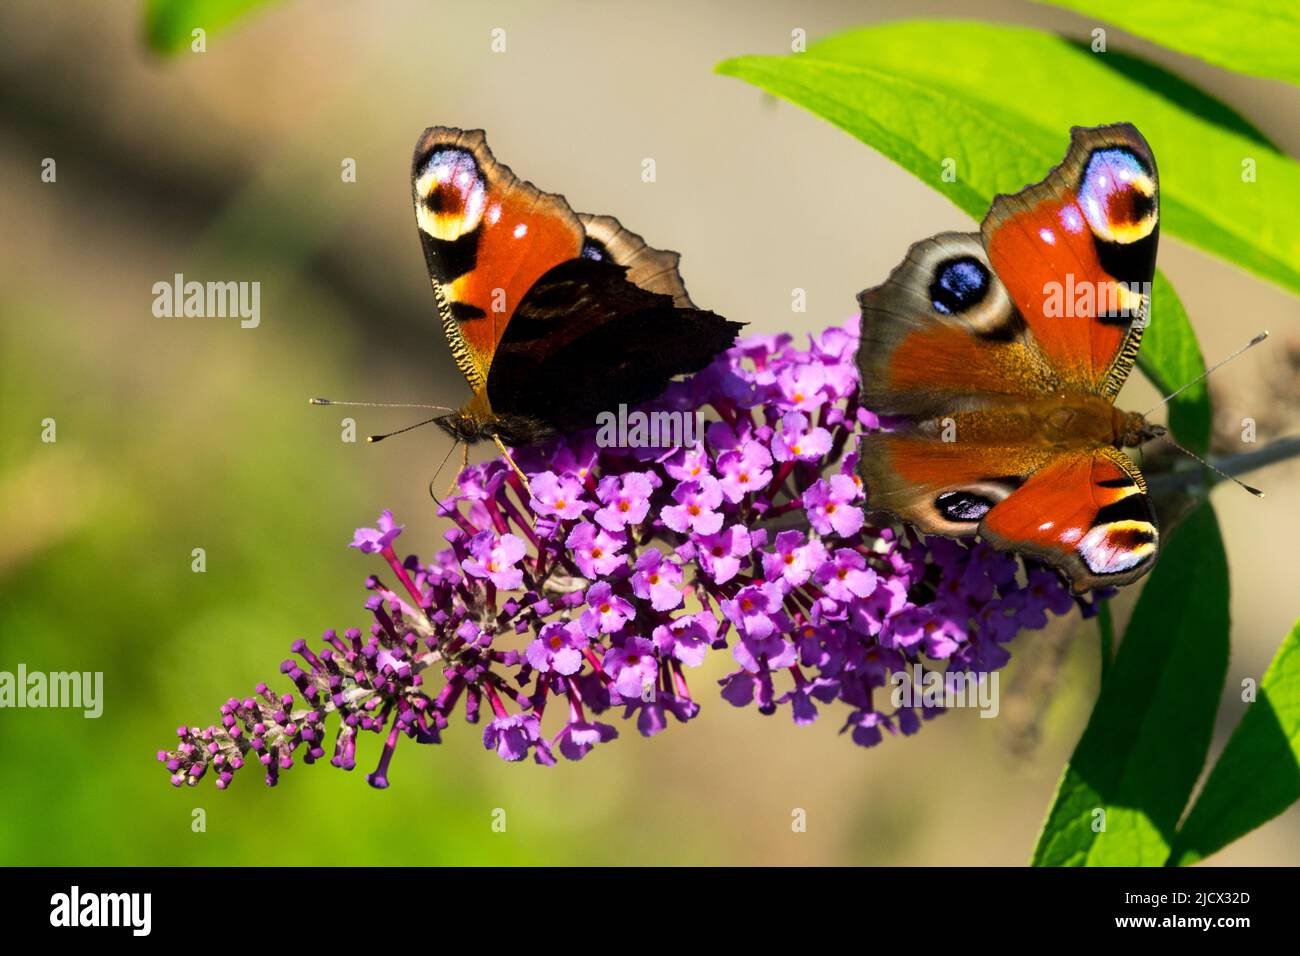 Two, Butterflies, Peacock butterfly, Inachis io, Aglais io, Butterfly on Buddleja, Flower Buddleja butterflies Stock Photo